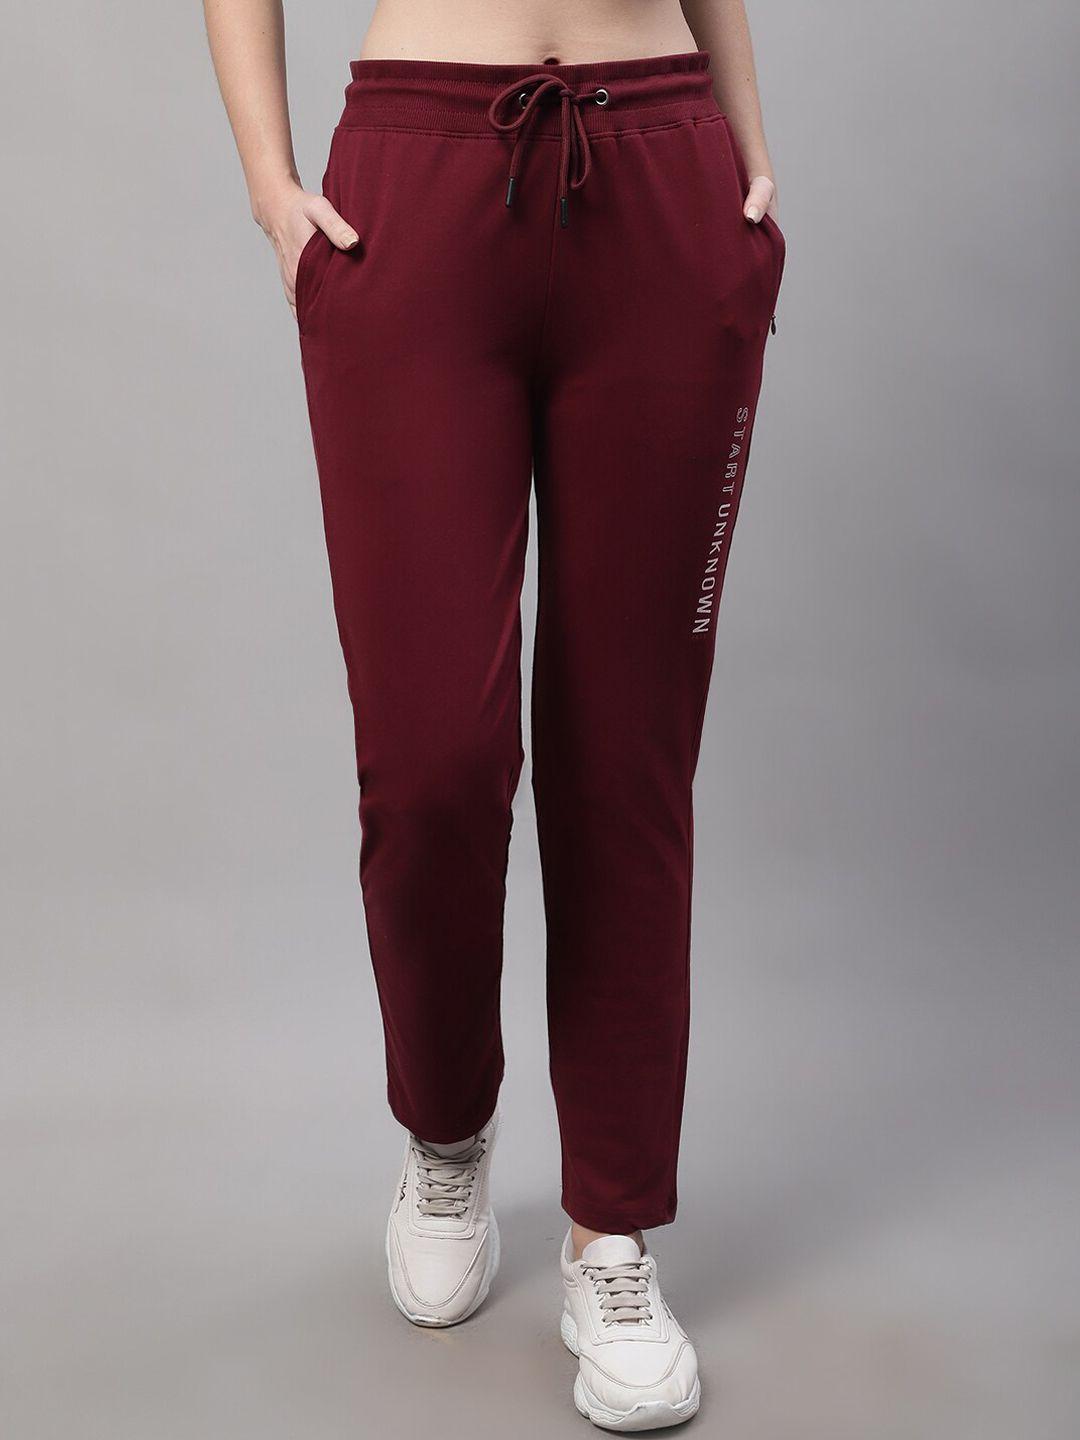 cantabil-women-printed-cotton-track-pant